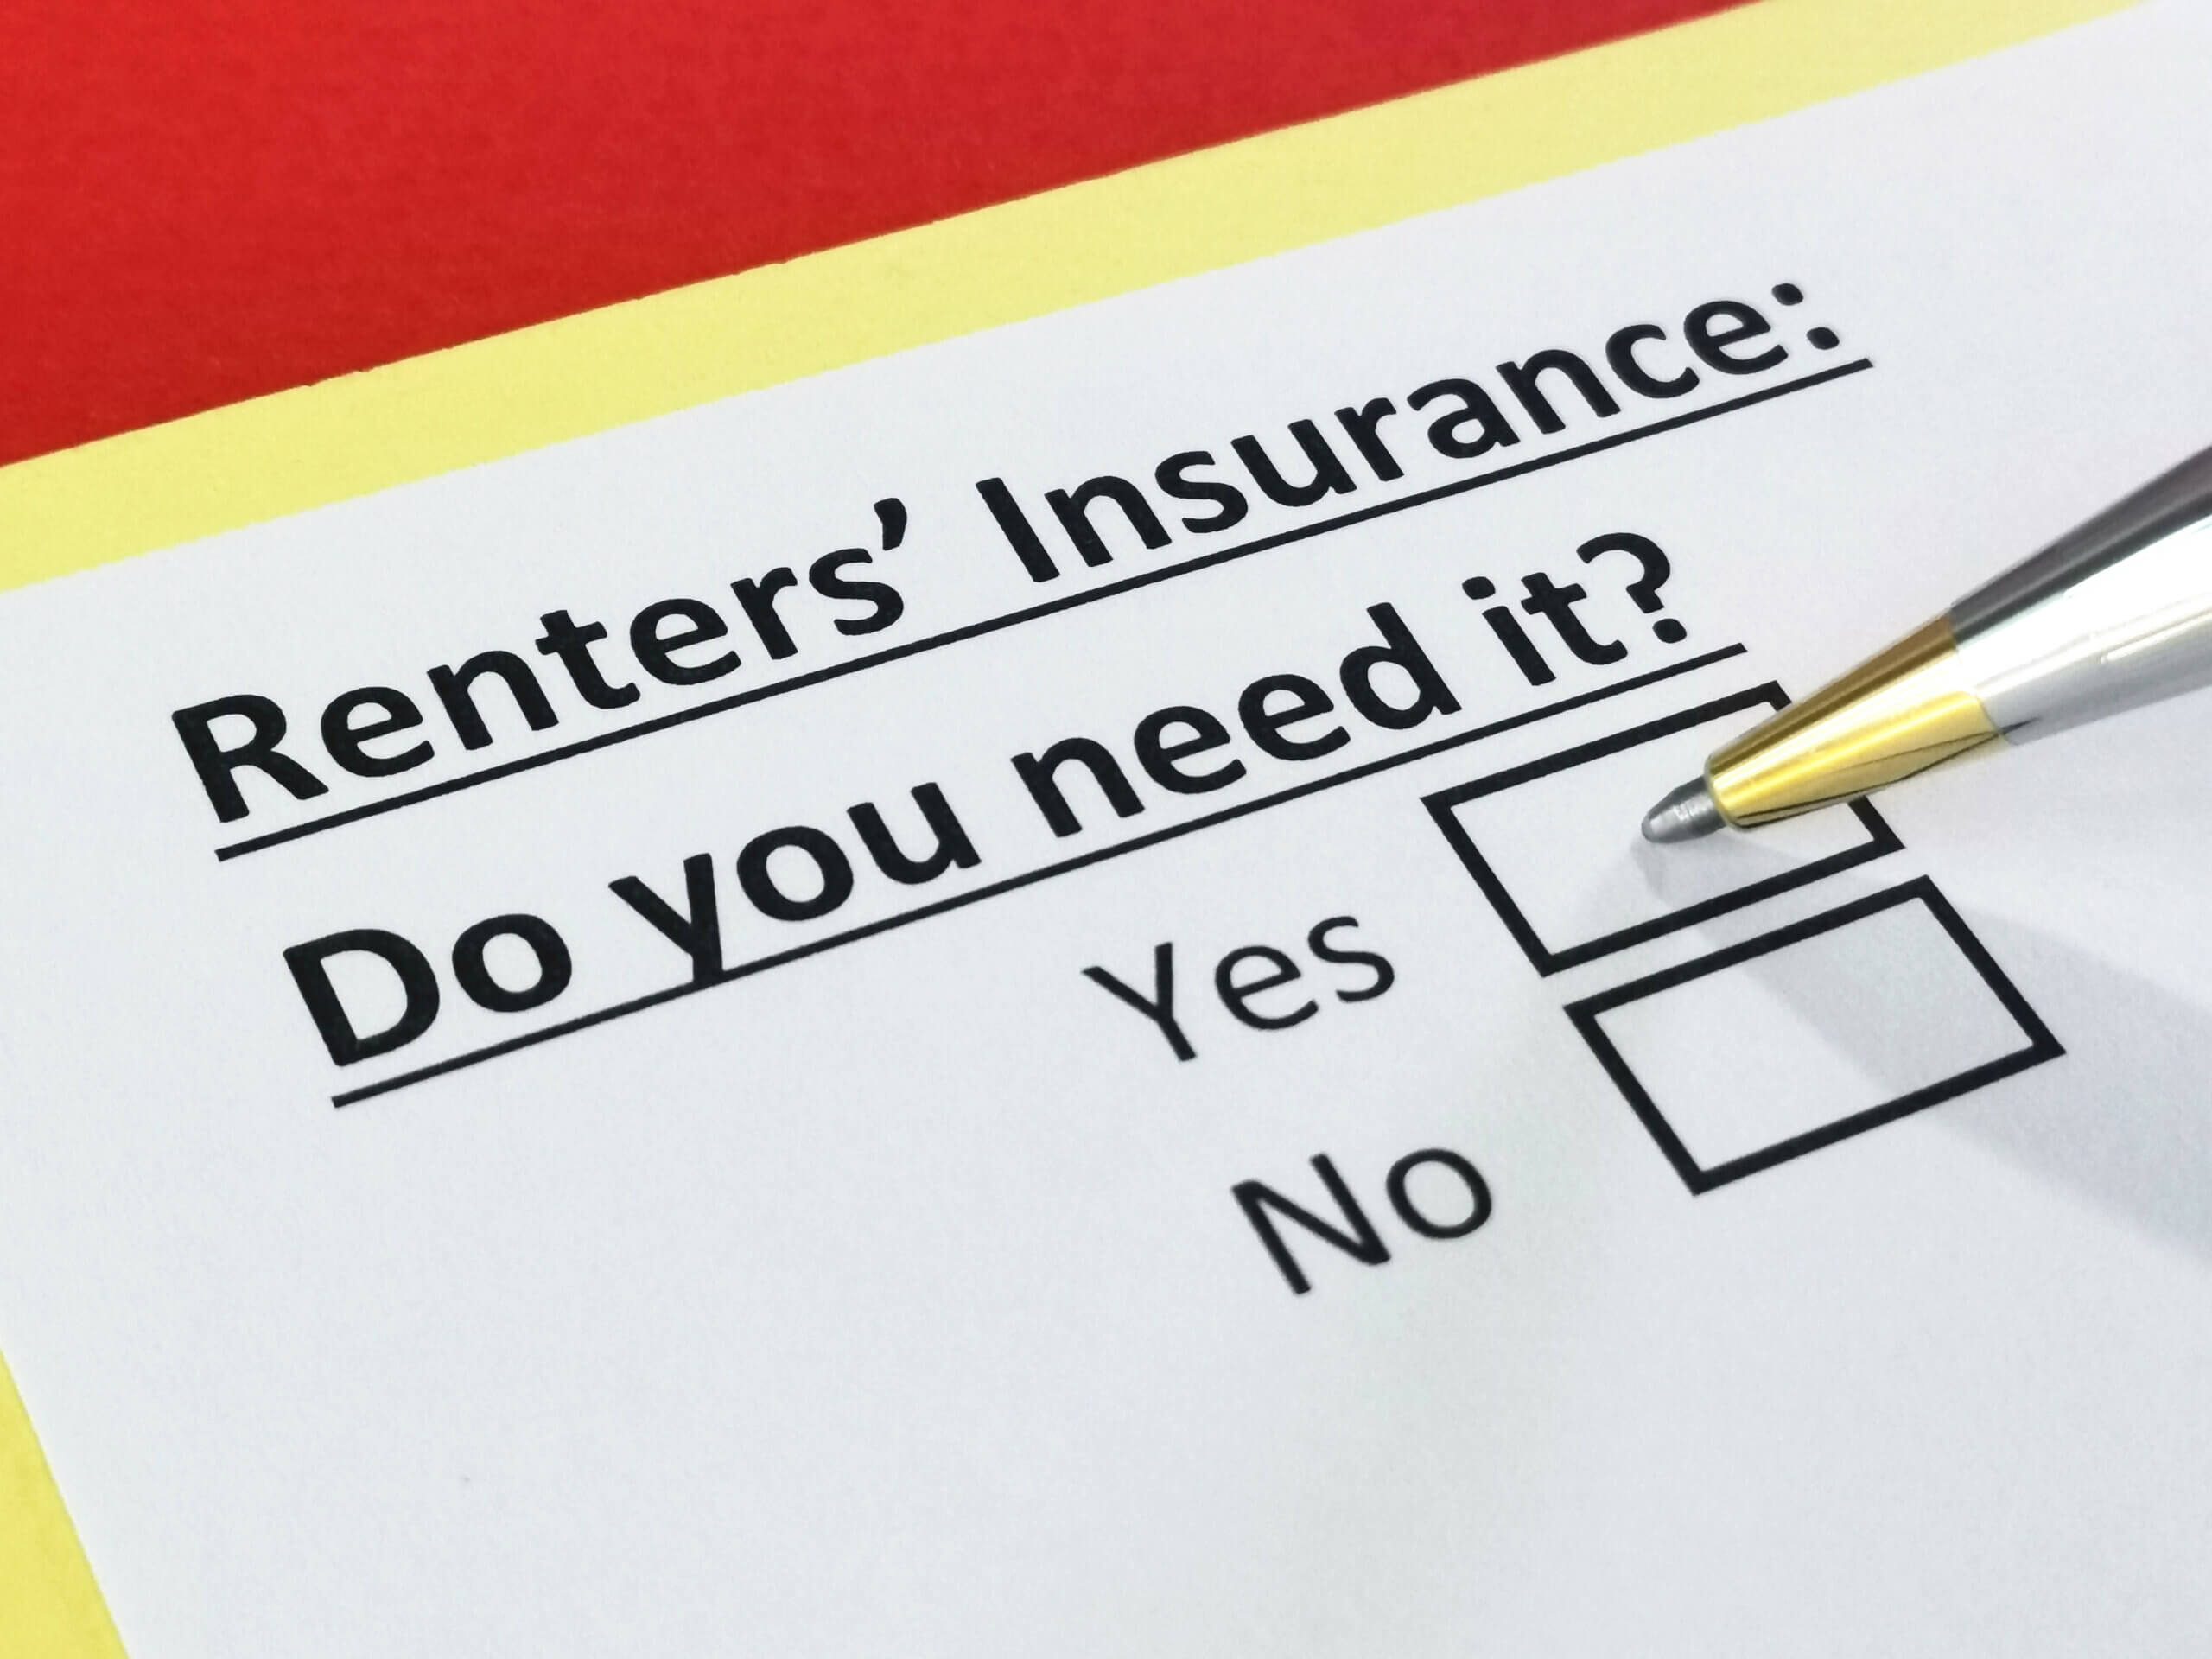 Where to Buy Renters Insurance